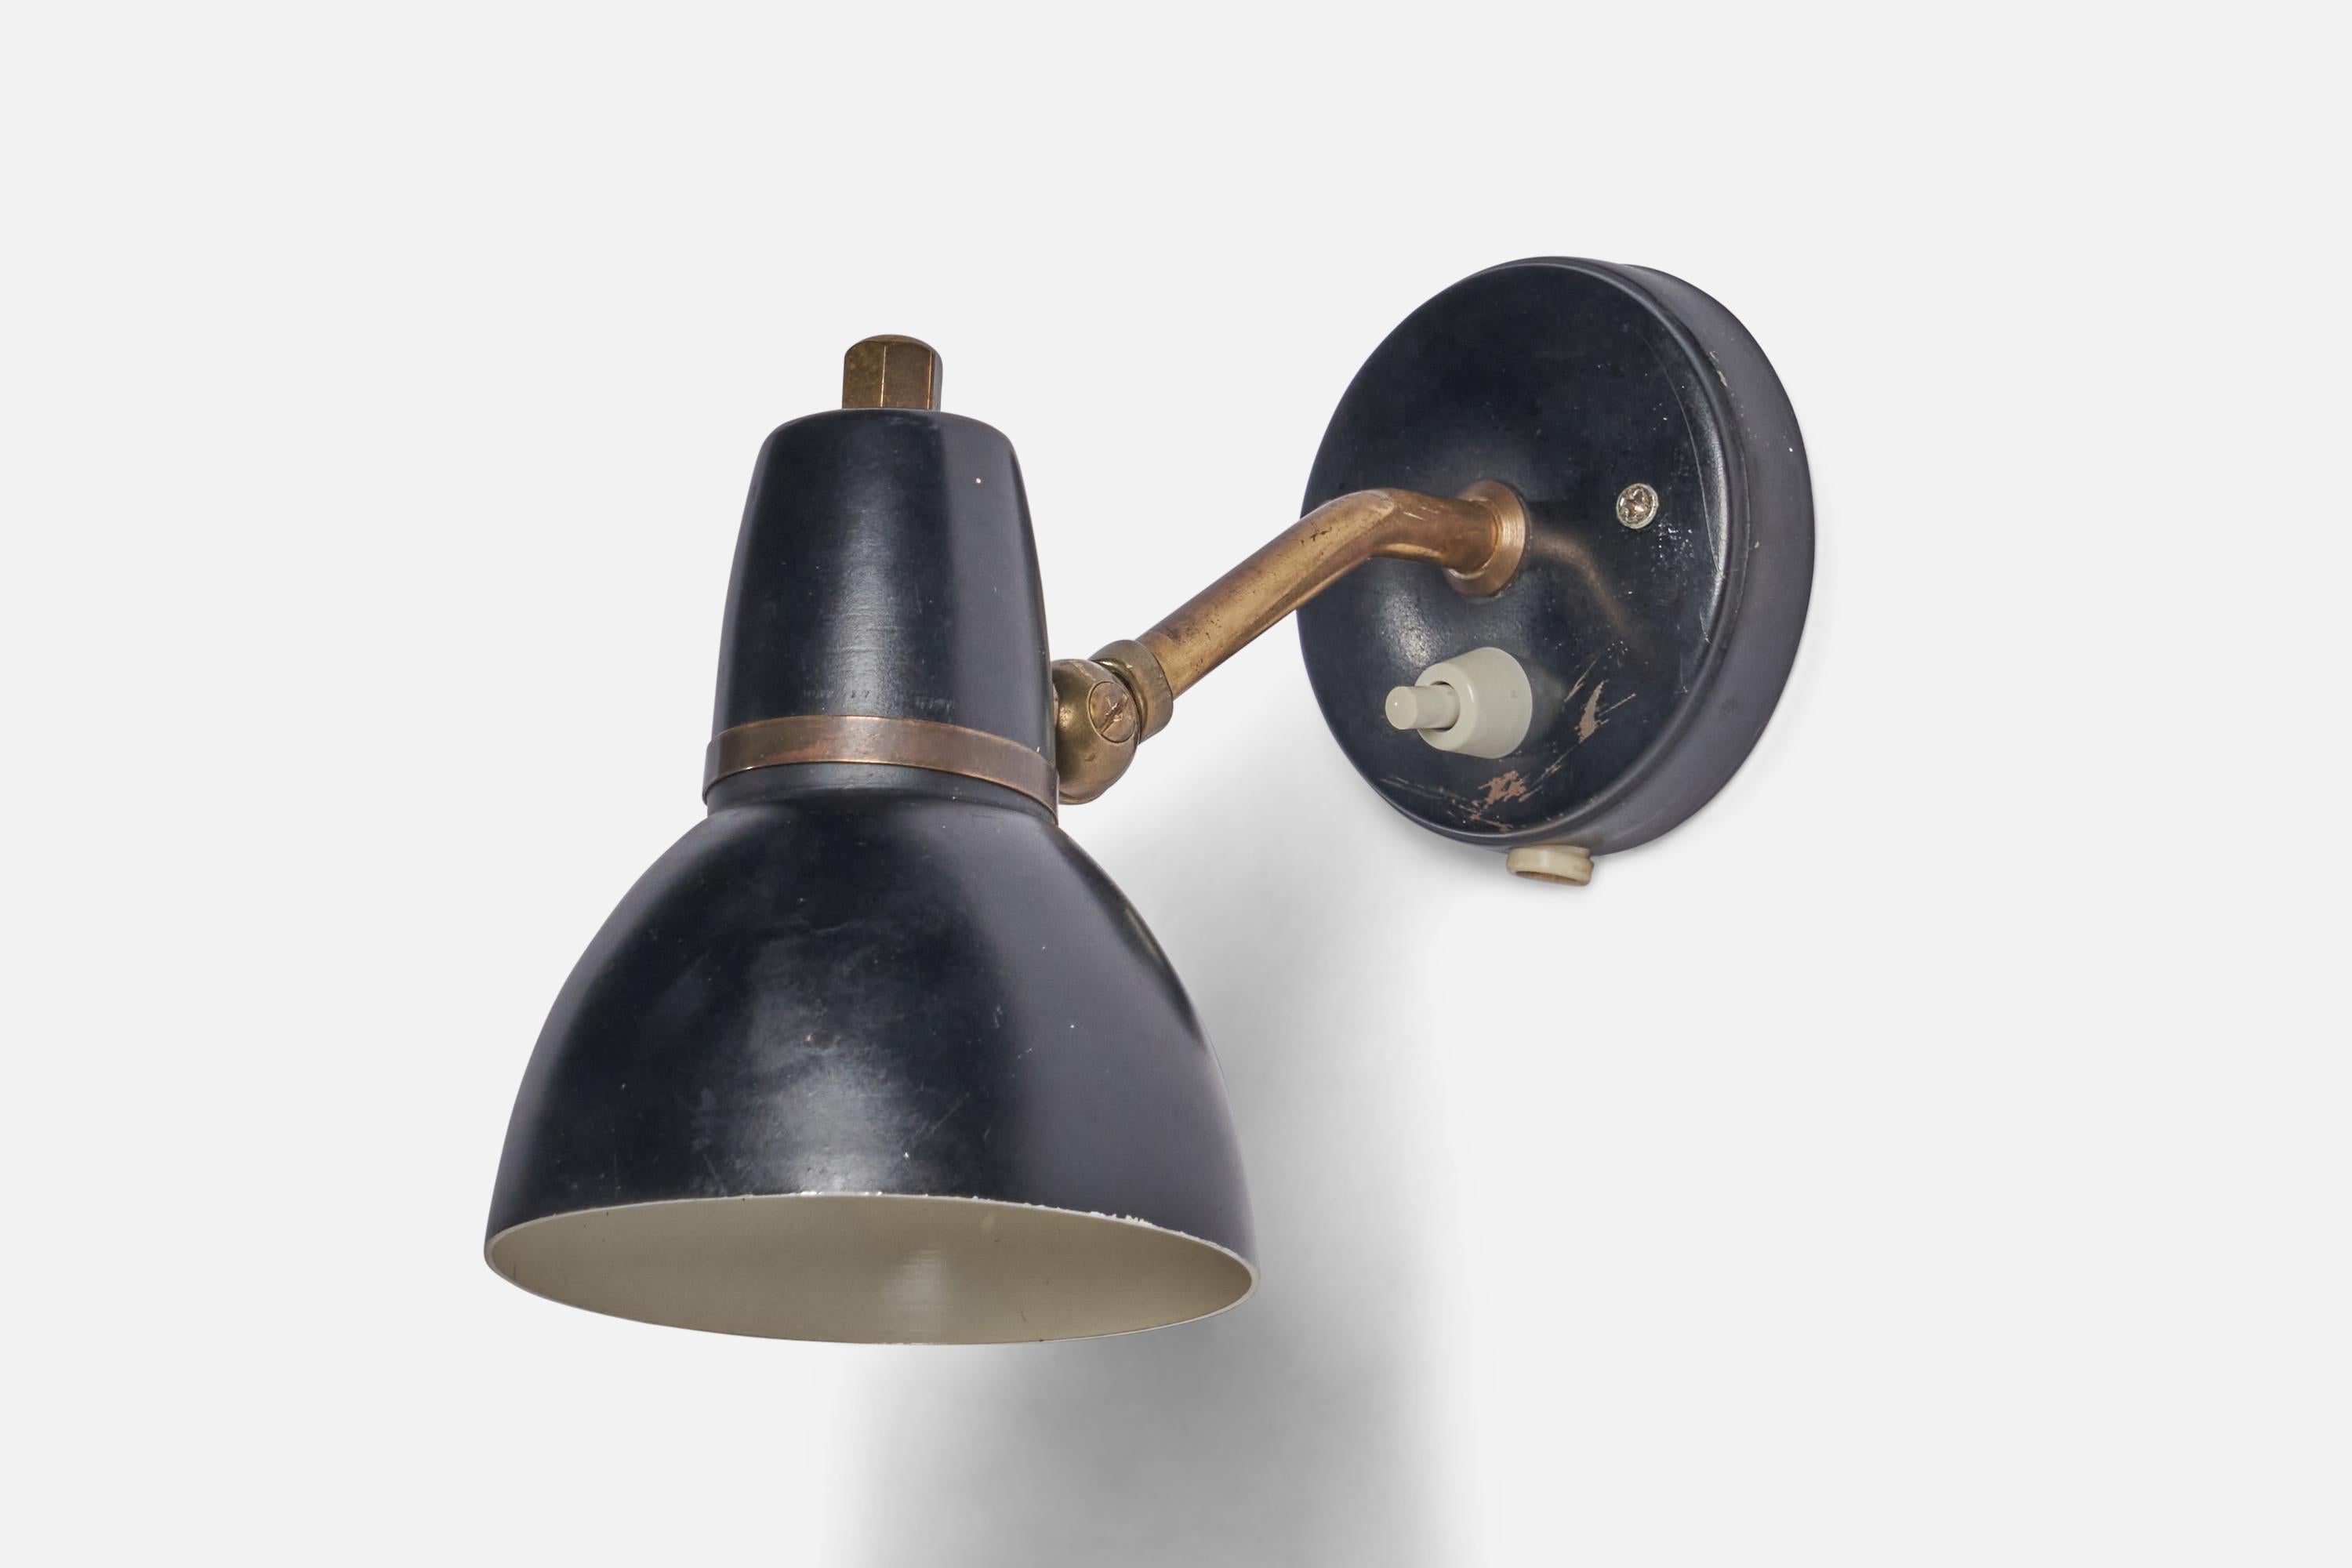 An adjustable brass and black-lacquered metal wall light, designed and produced in Denmark, 1940s.

Originally configured for plug in.

Overall Dimensions (inches): 6.5” H x 3.8” W x 6” D
Bulb Specifications: E-14 Bulb
Number of Sockets: 1
All